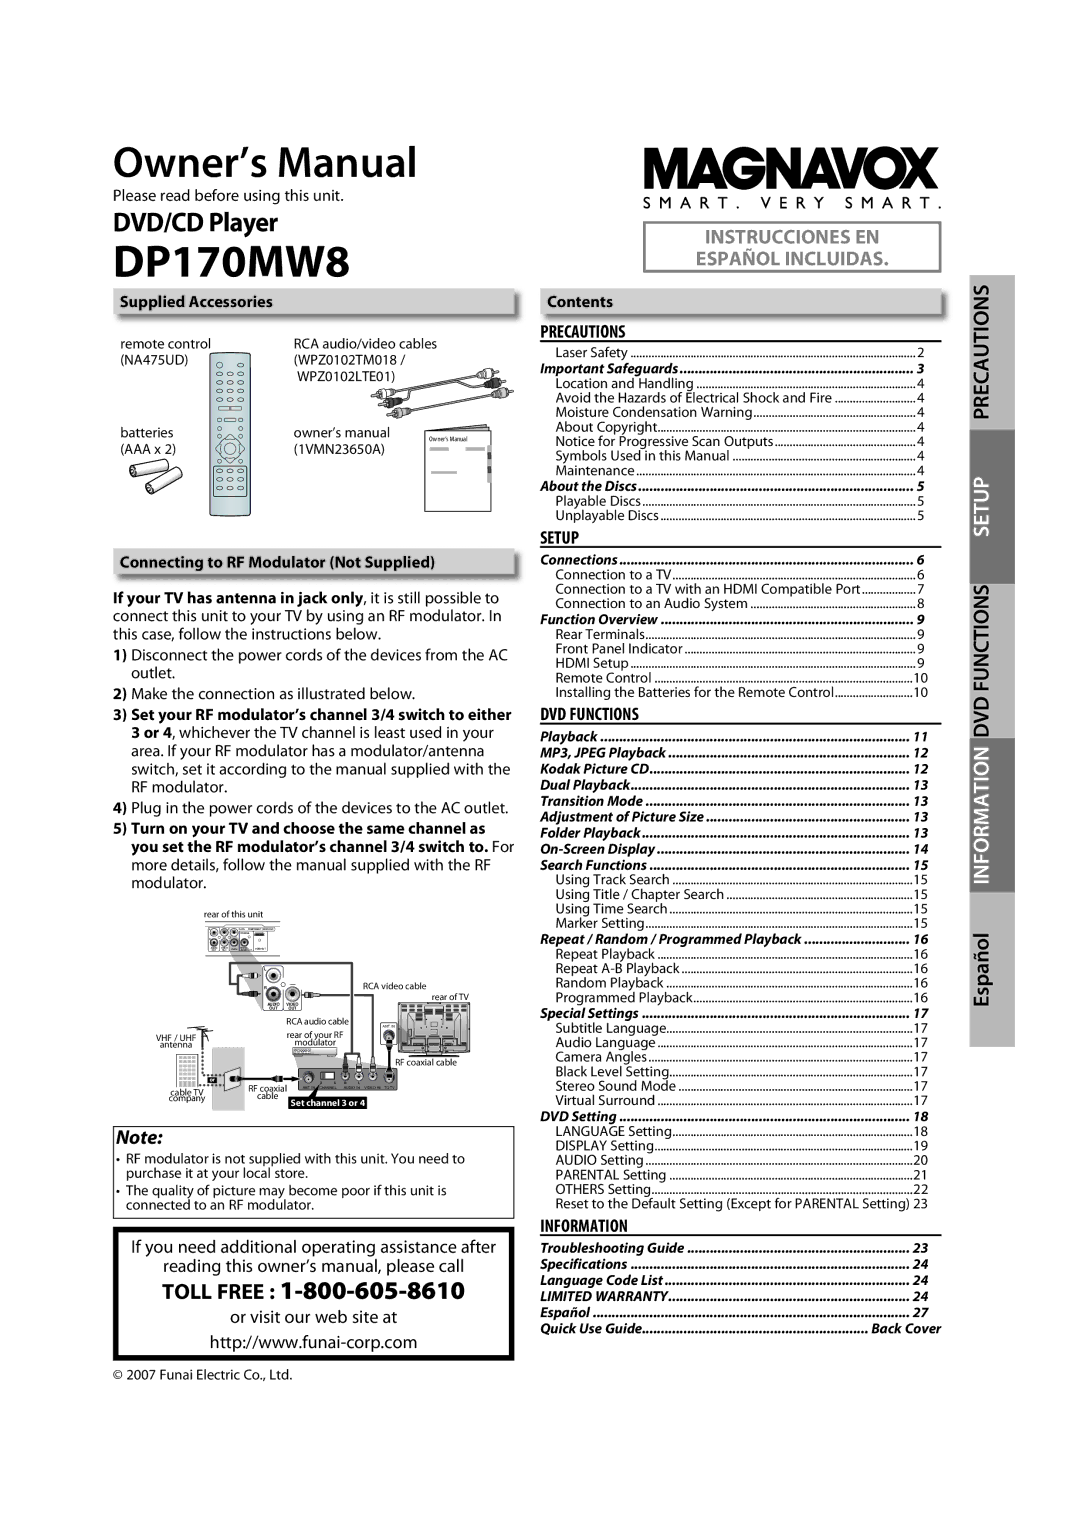 Magnavox DP170MW8 owner manual Please read before using this unit, Supplied Accessories, Contents 